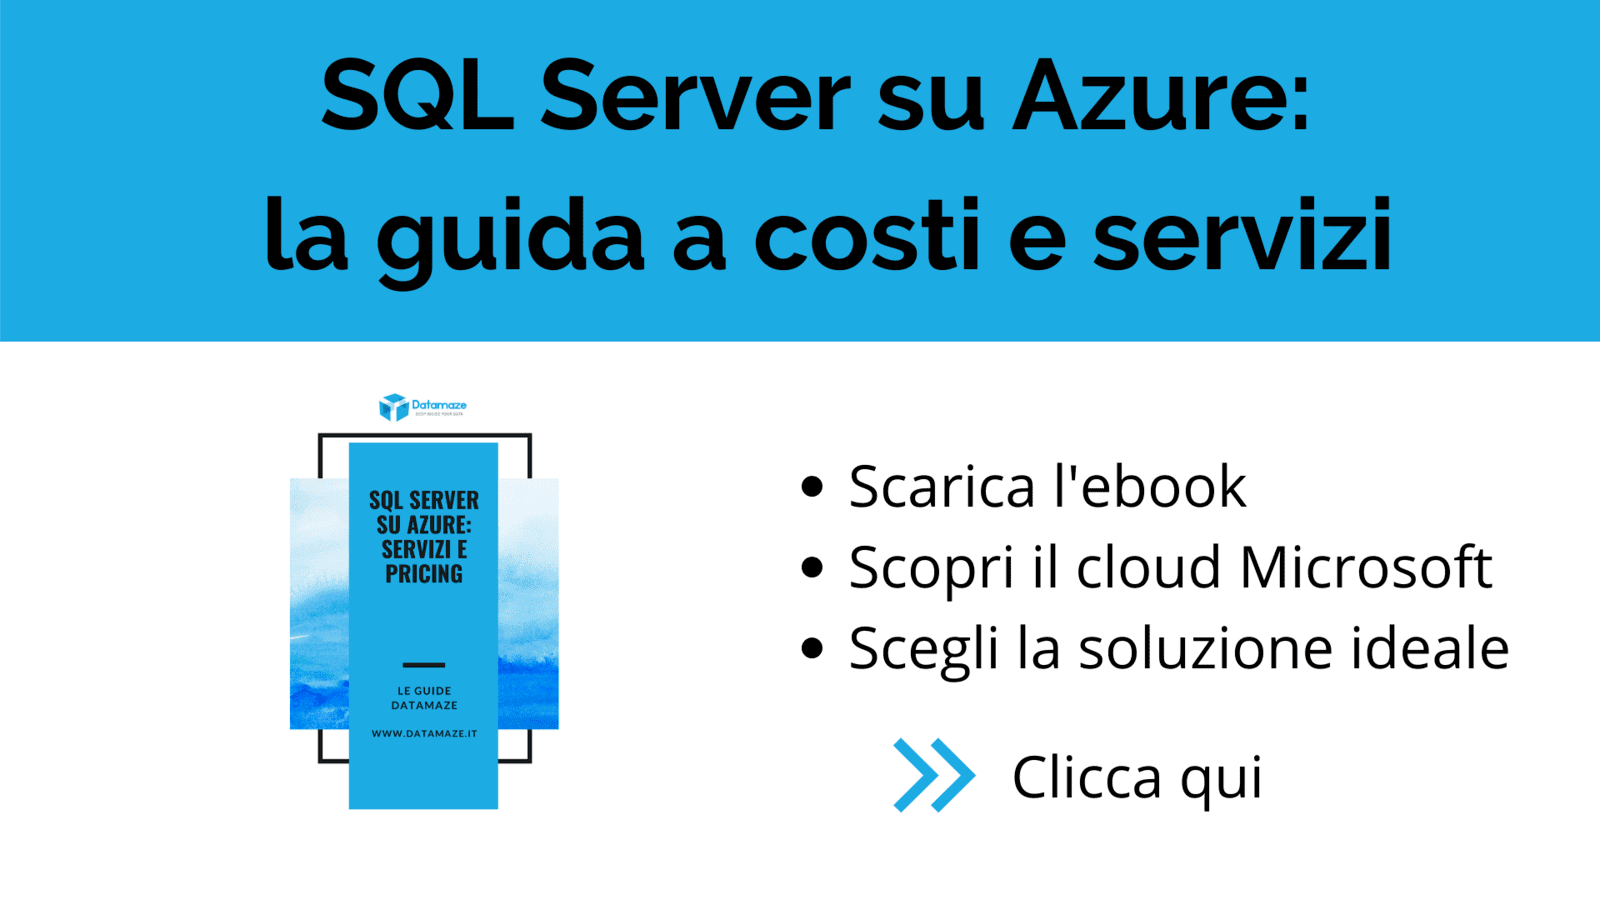 Azure SQL pricing guide